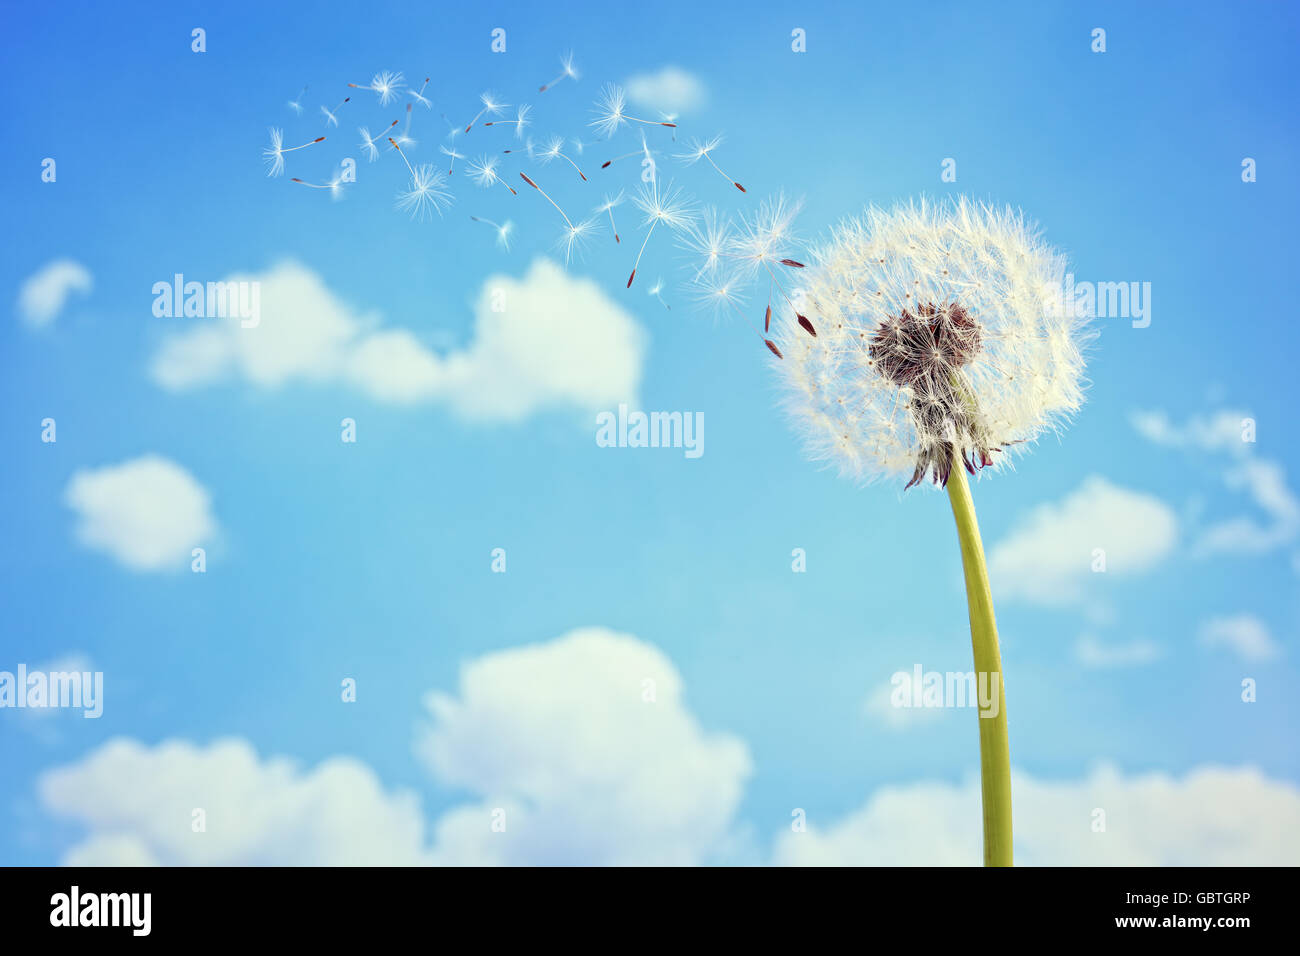 Dandelion with seeds blowing away in the wind across a clear blue sky with copy space Stock Photo